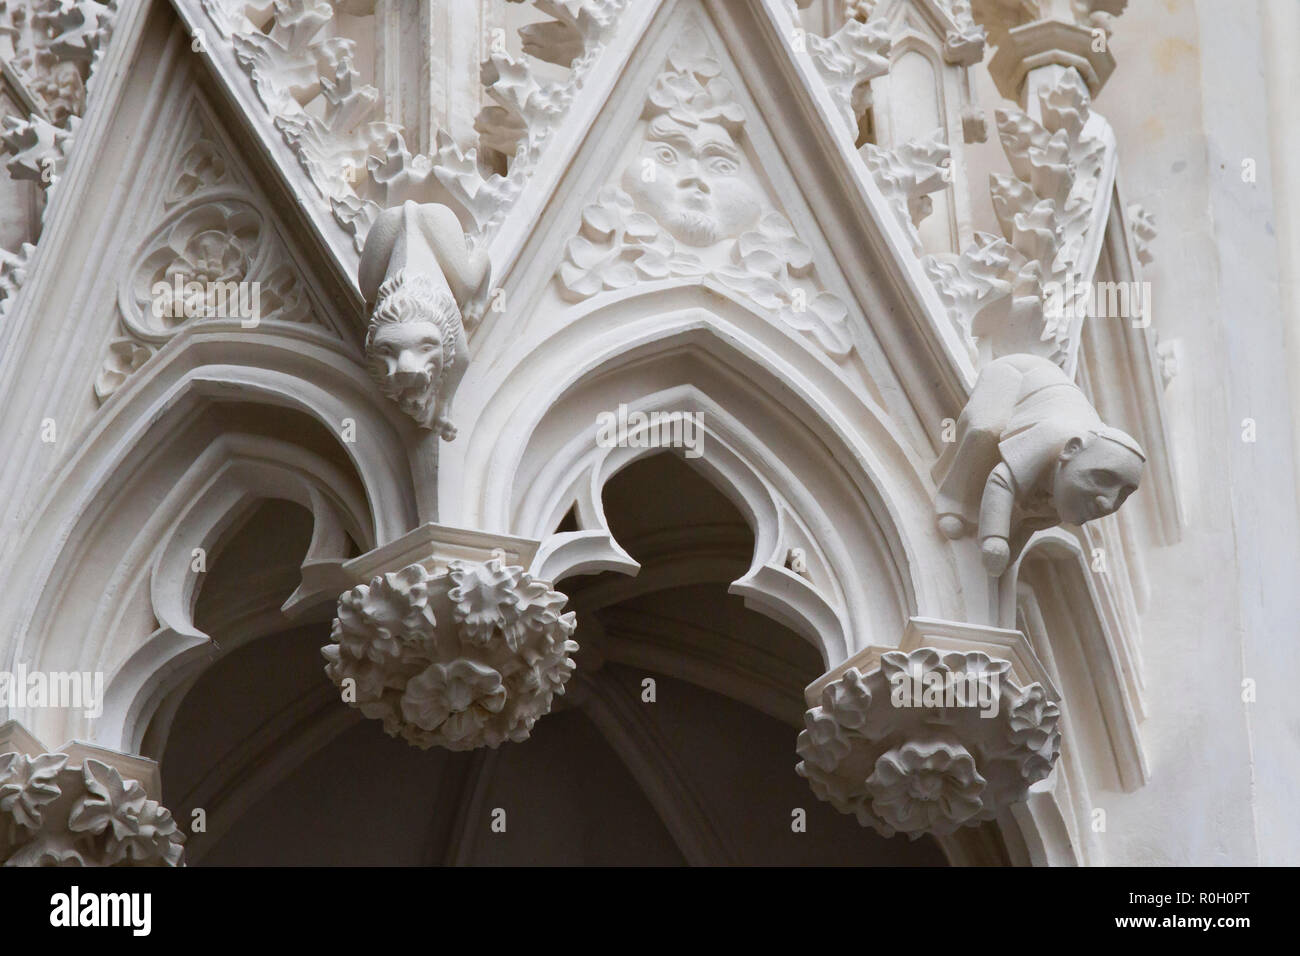 Pope Francis (right) as a small ornamental gargoyle on a baldachin at the main portal of the cathedral, Cologne, Germany.  Papst Franziskus (rechts) a Stock Photo